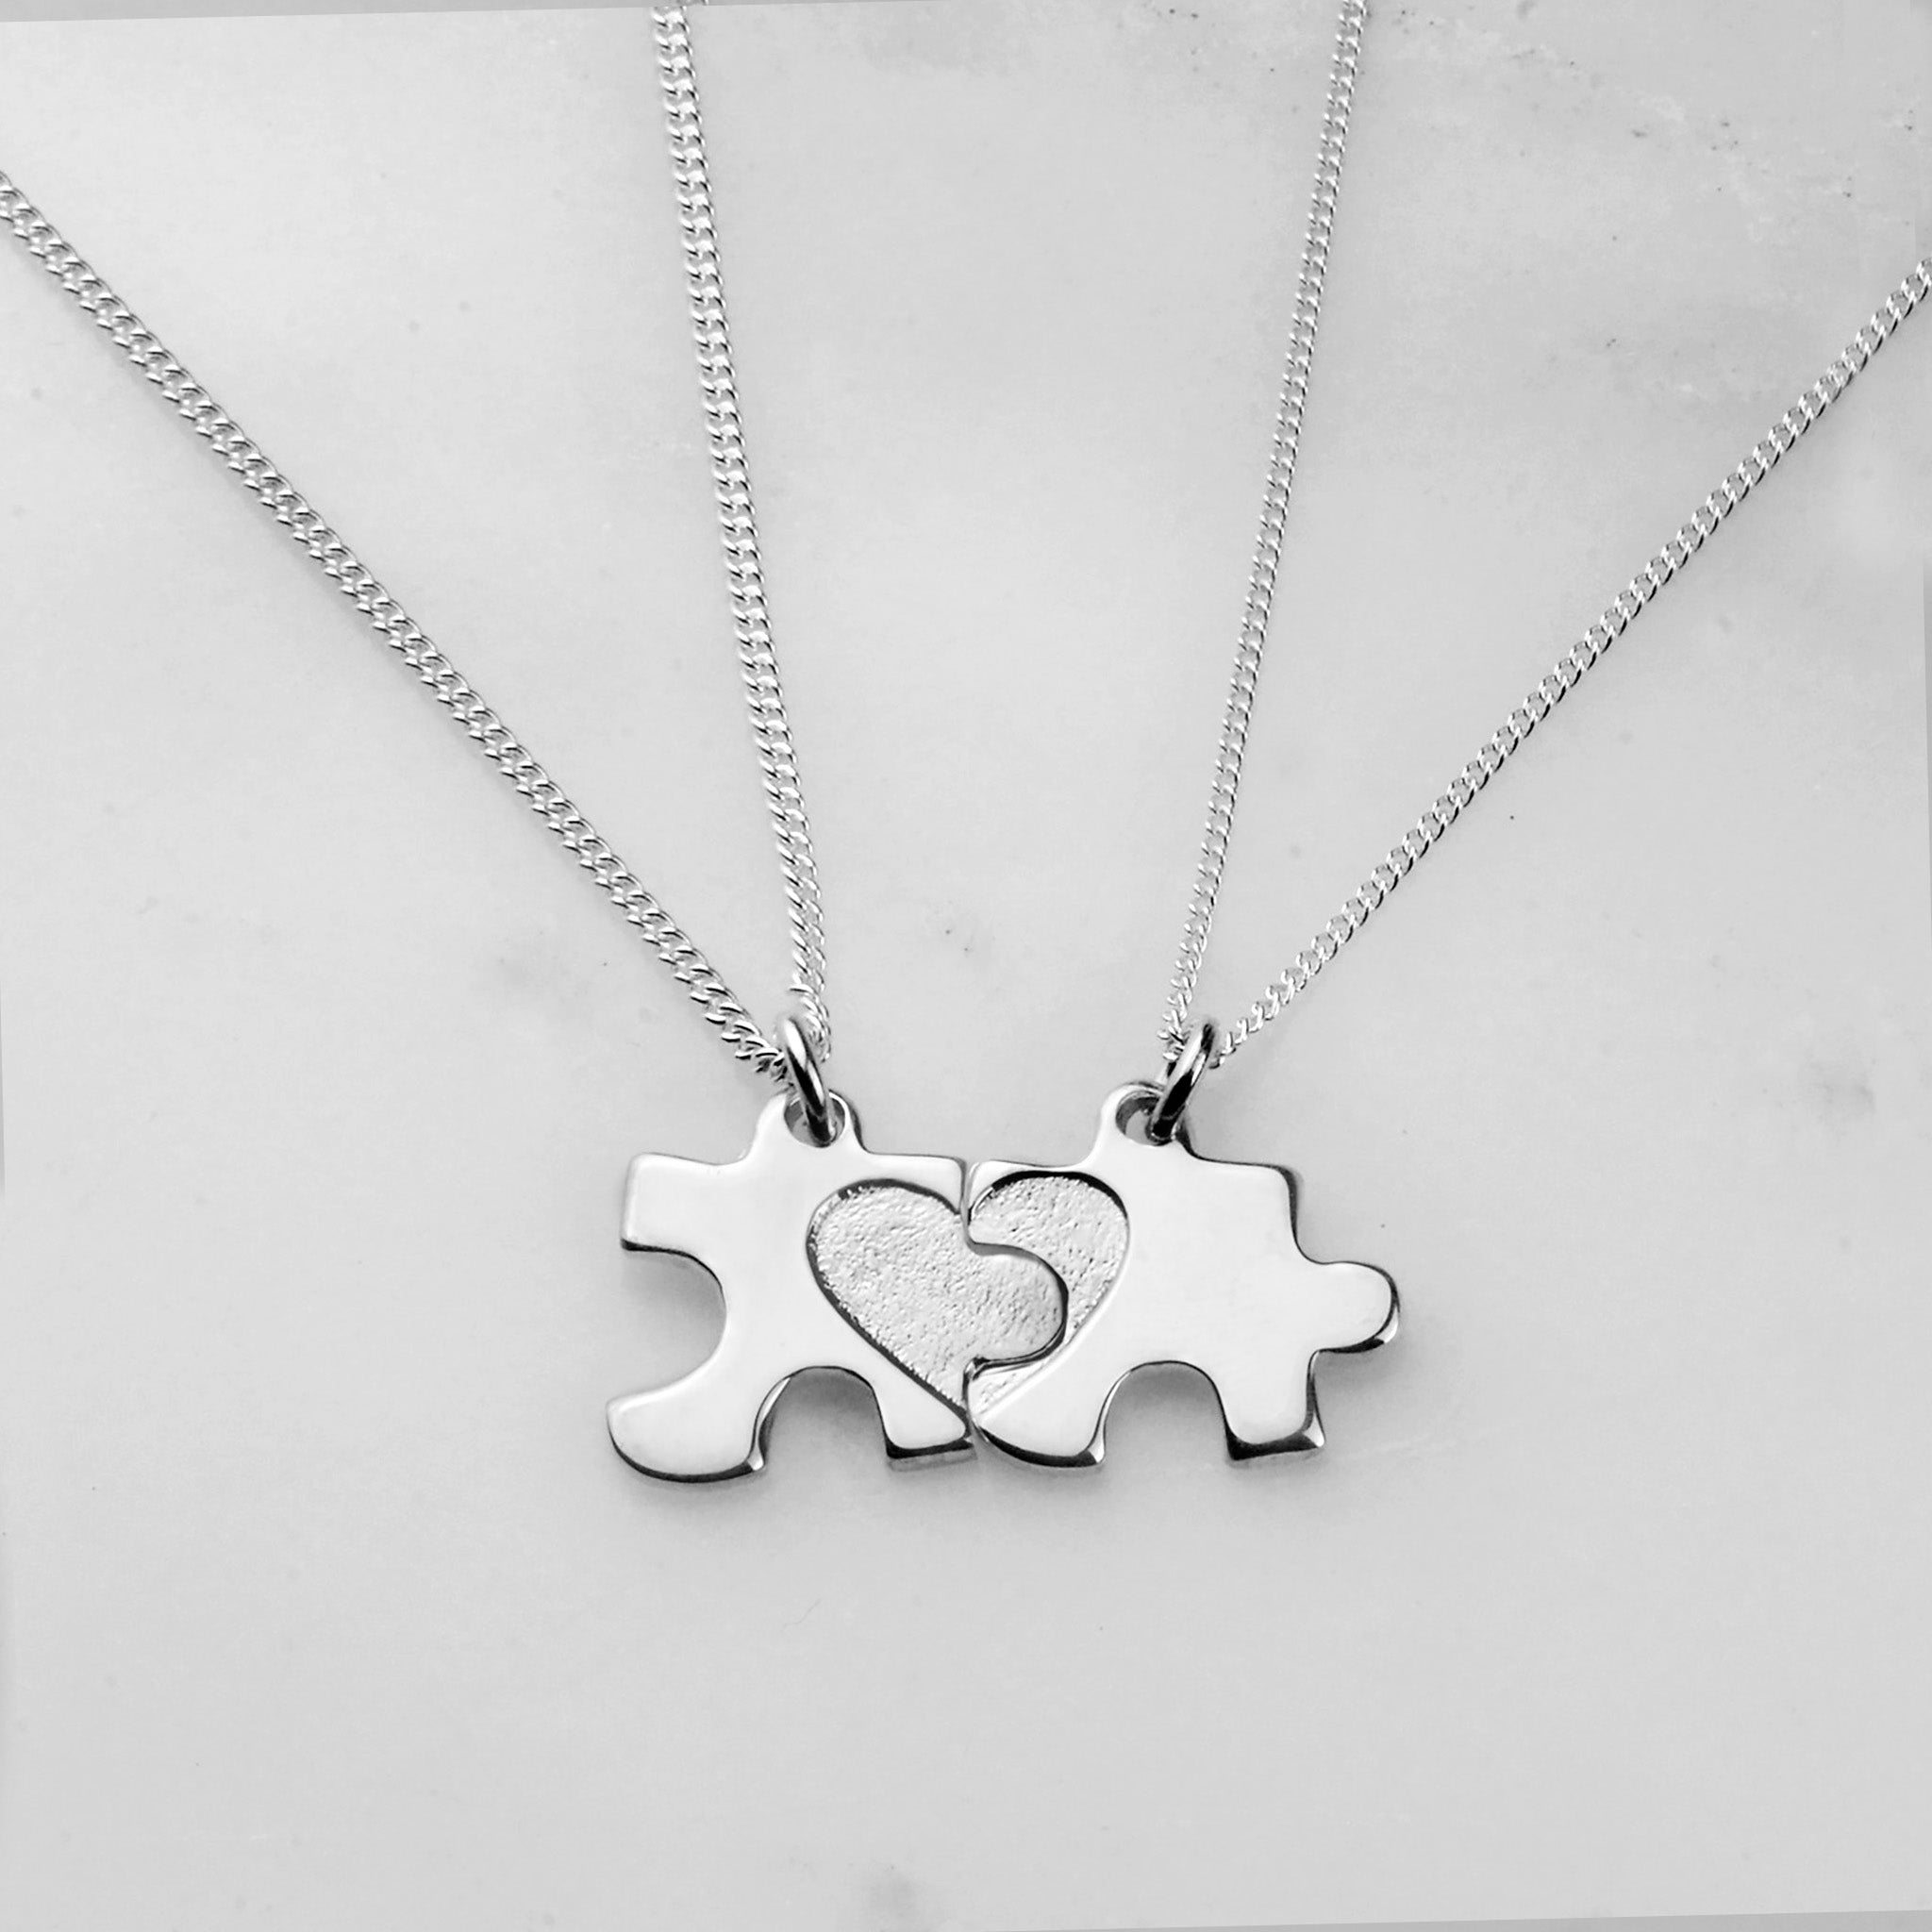 Gold Interlocking Jigsaw Puzzle Piece Necklace Set for 2 : Amazon.ca:  Handmade Products